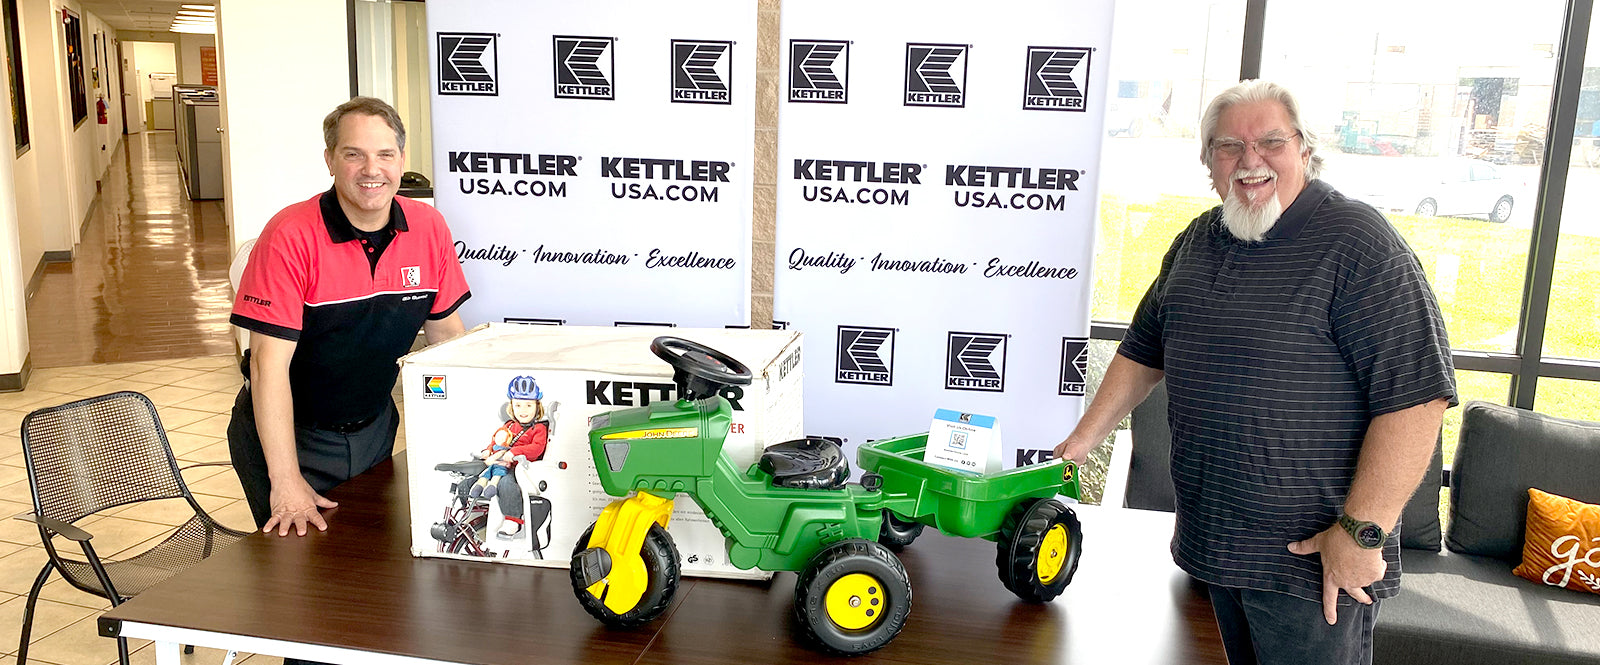 Above and beyond our call to manufacture and distribute the highest quality products, KETTLER looks for ways to give back to our community. Through our KETTLER Cares program, we partner with organizations that share our heart for enriching people’s lives.